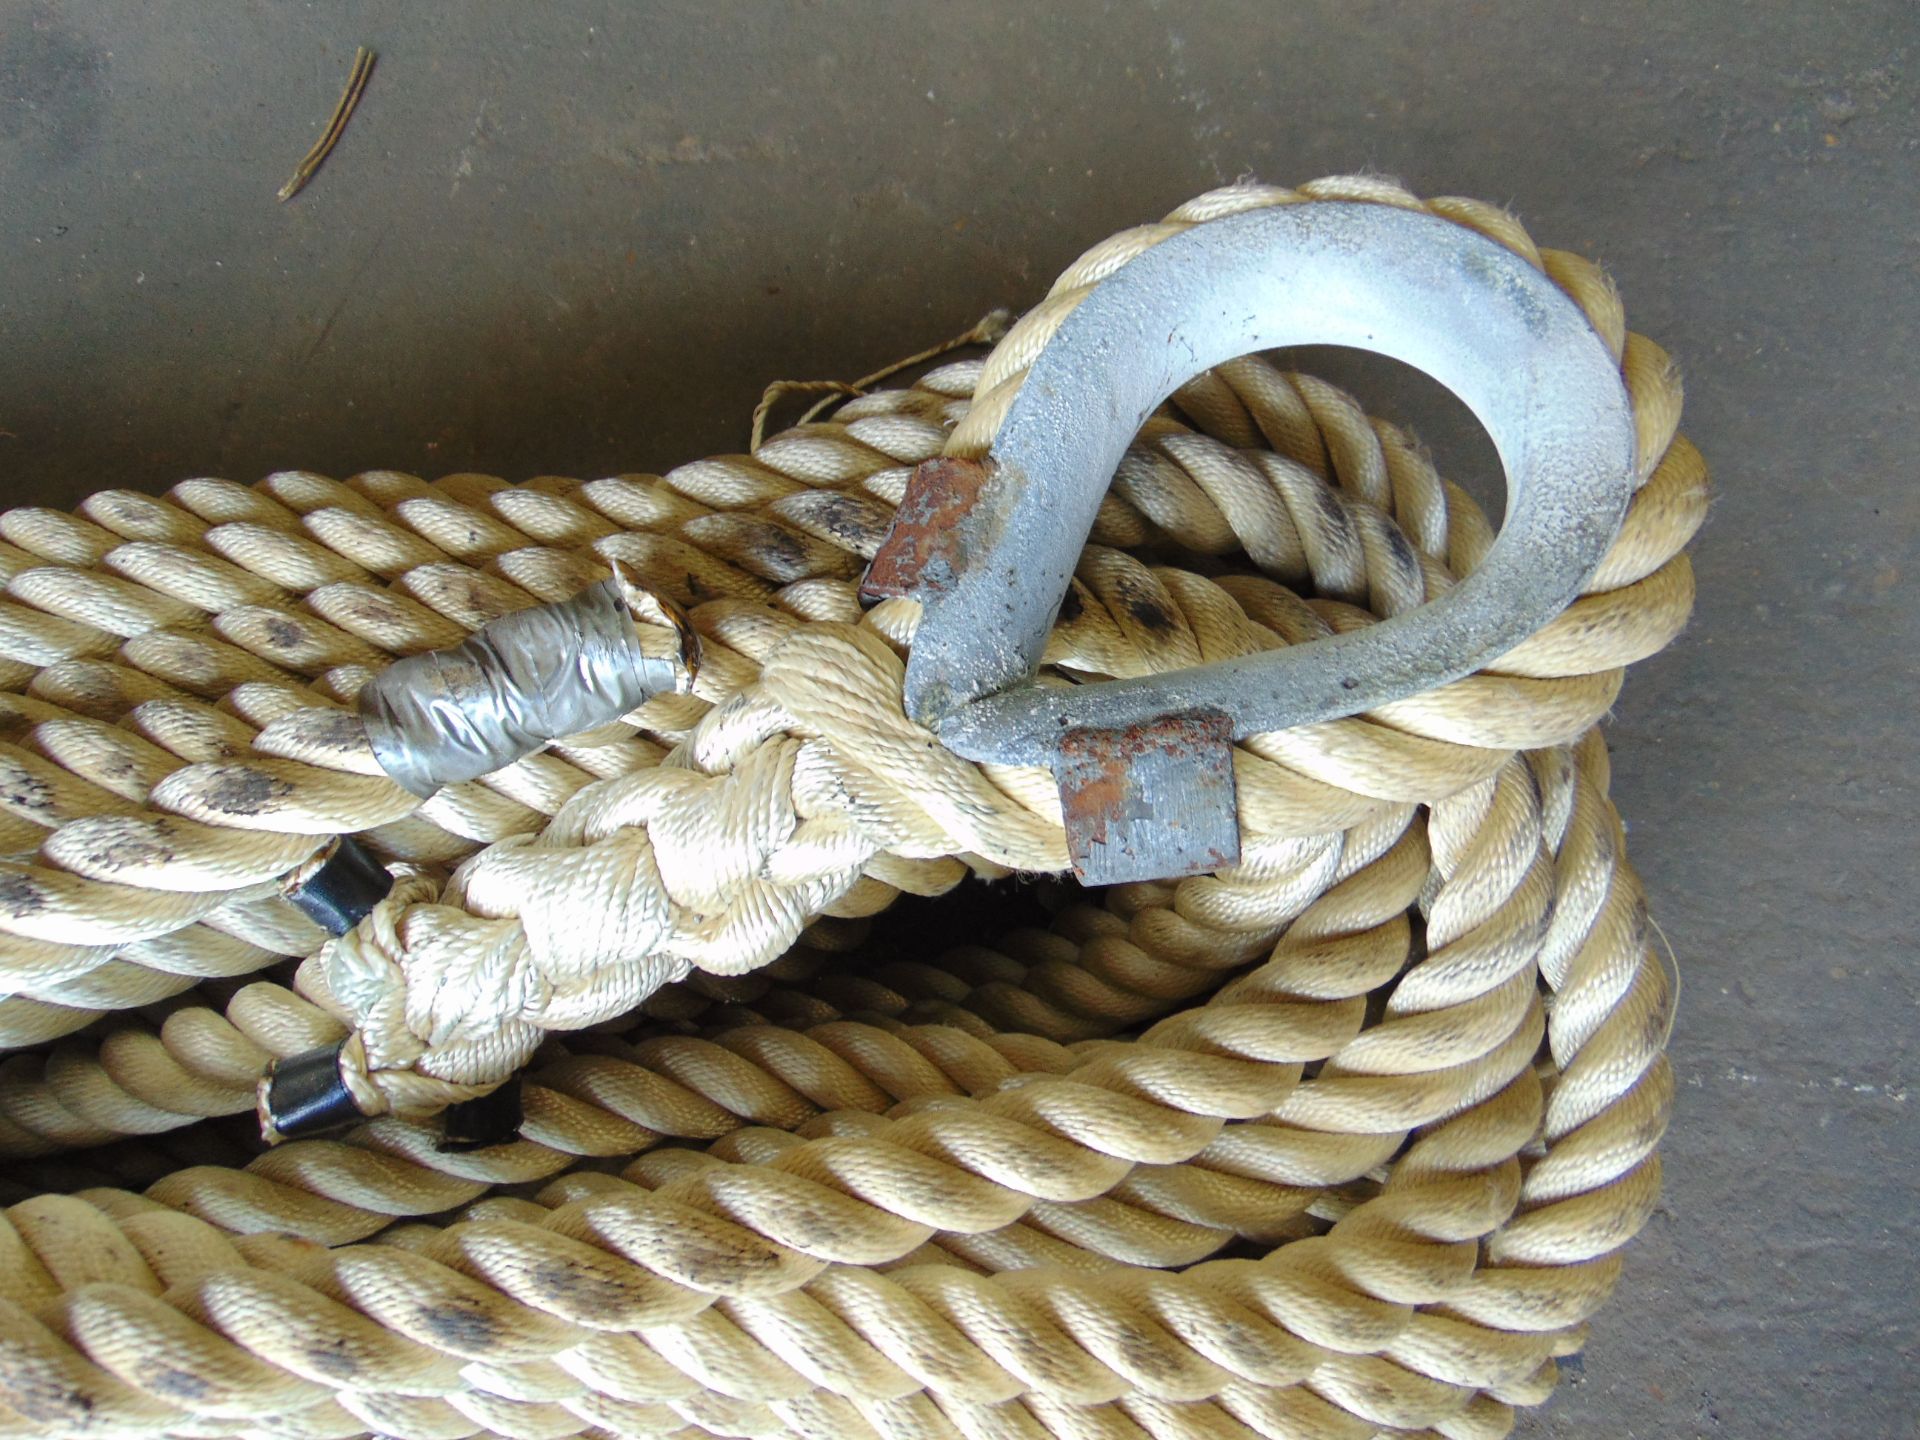 Large Heavy Duty Mooring Rope Unissued as shown - Image 3 of 4